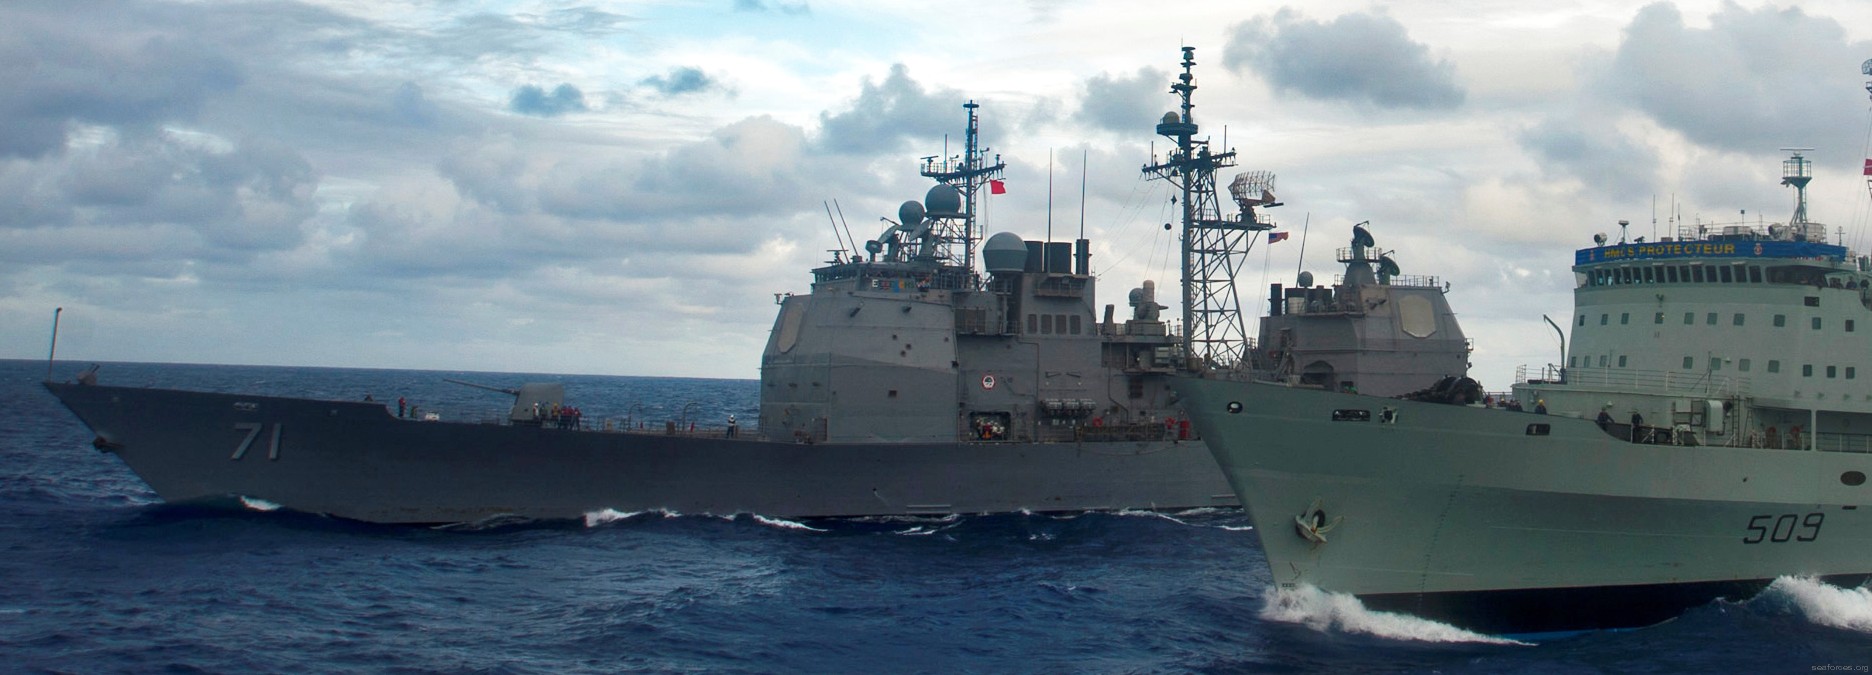 cg-71 uss cape st. george ticonderoga class guided missile cruiser us navy 19